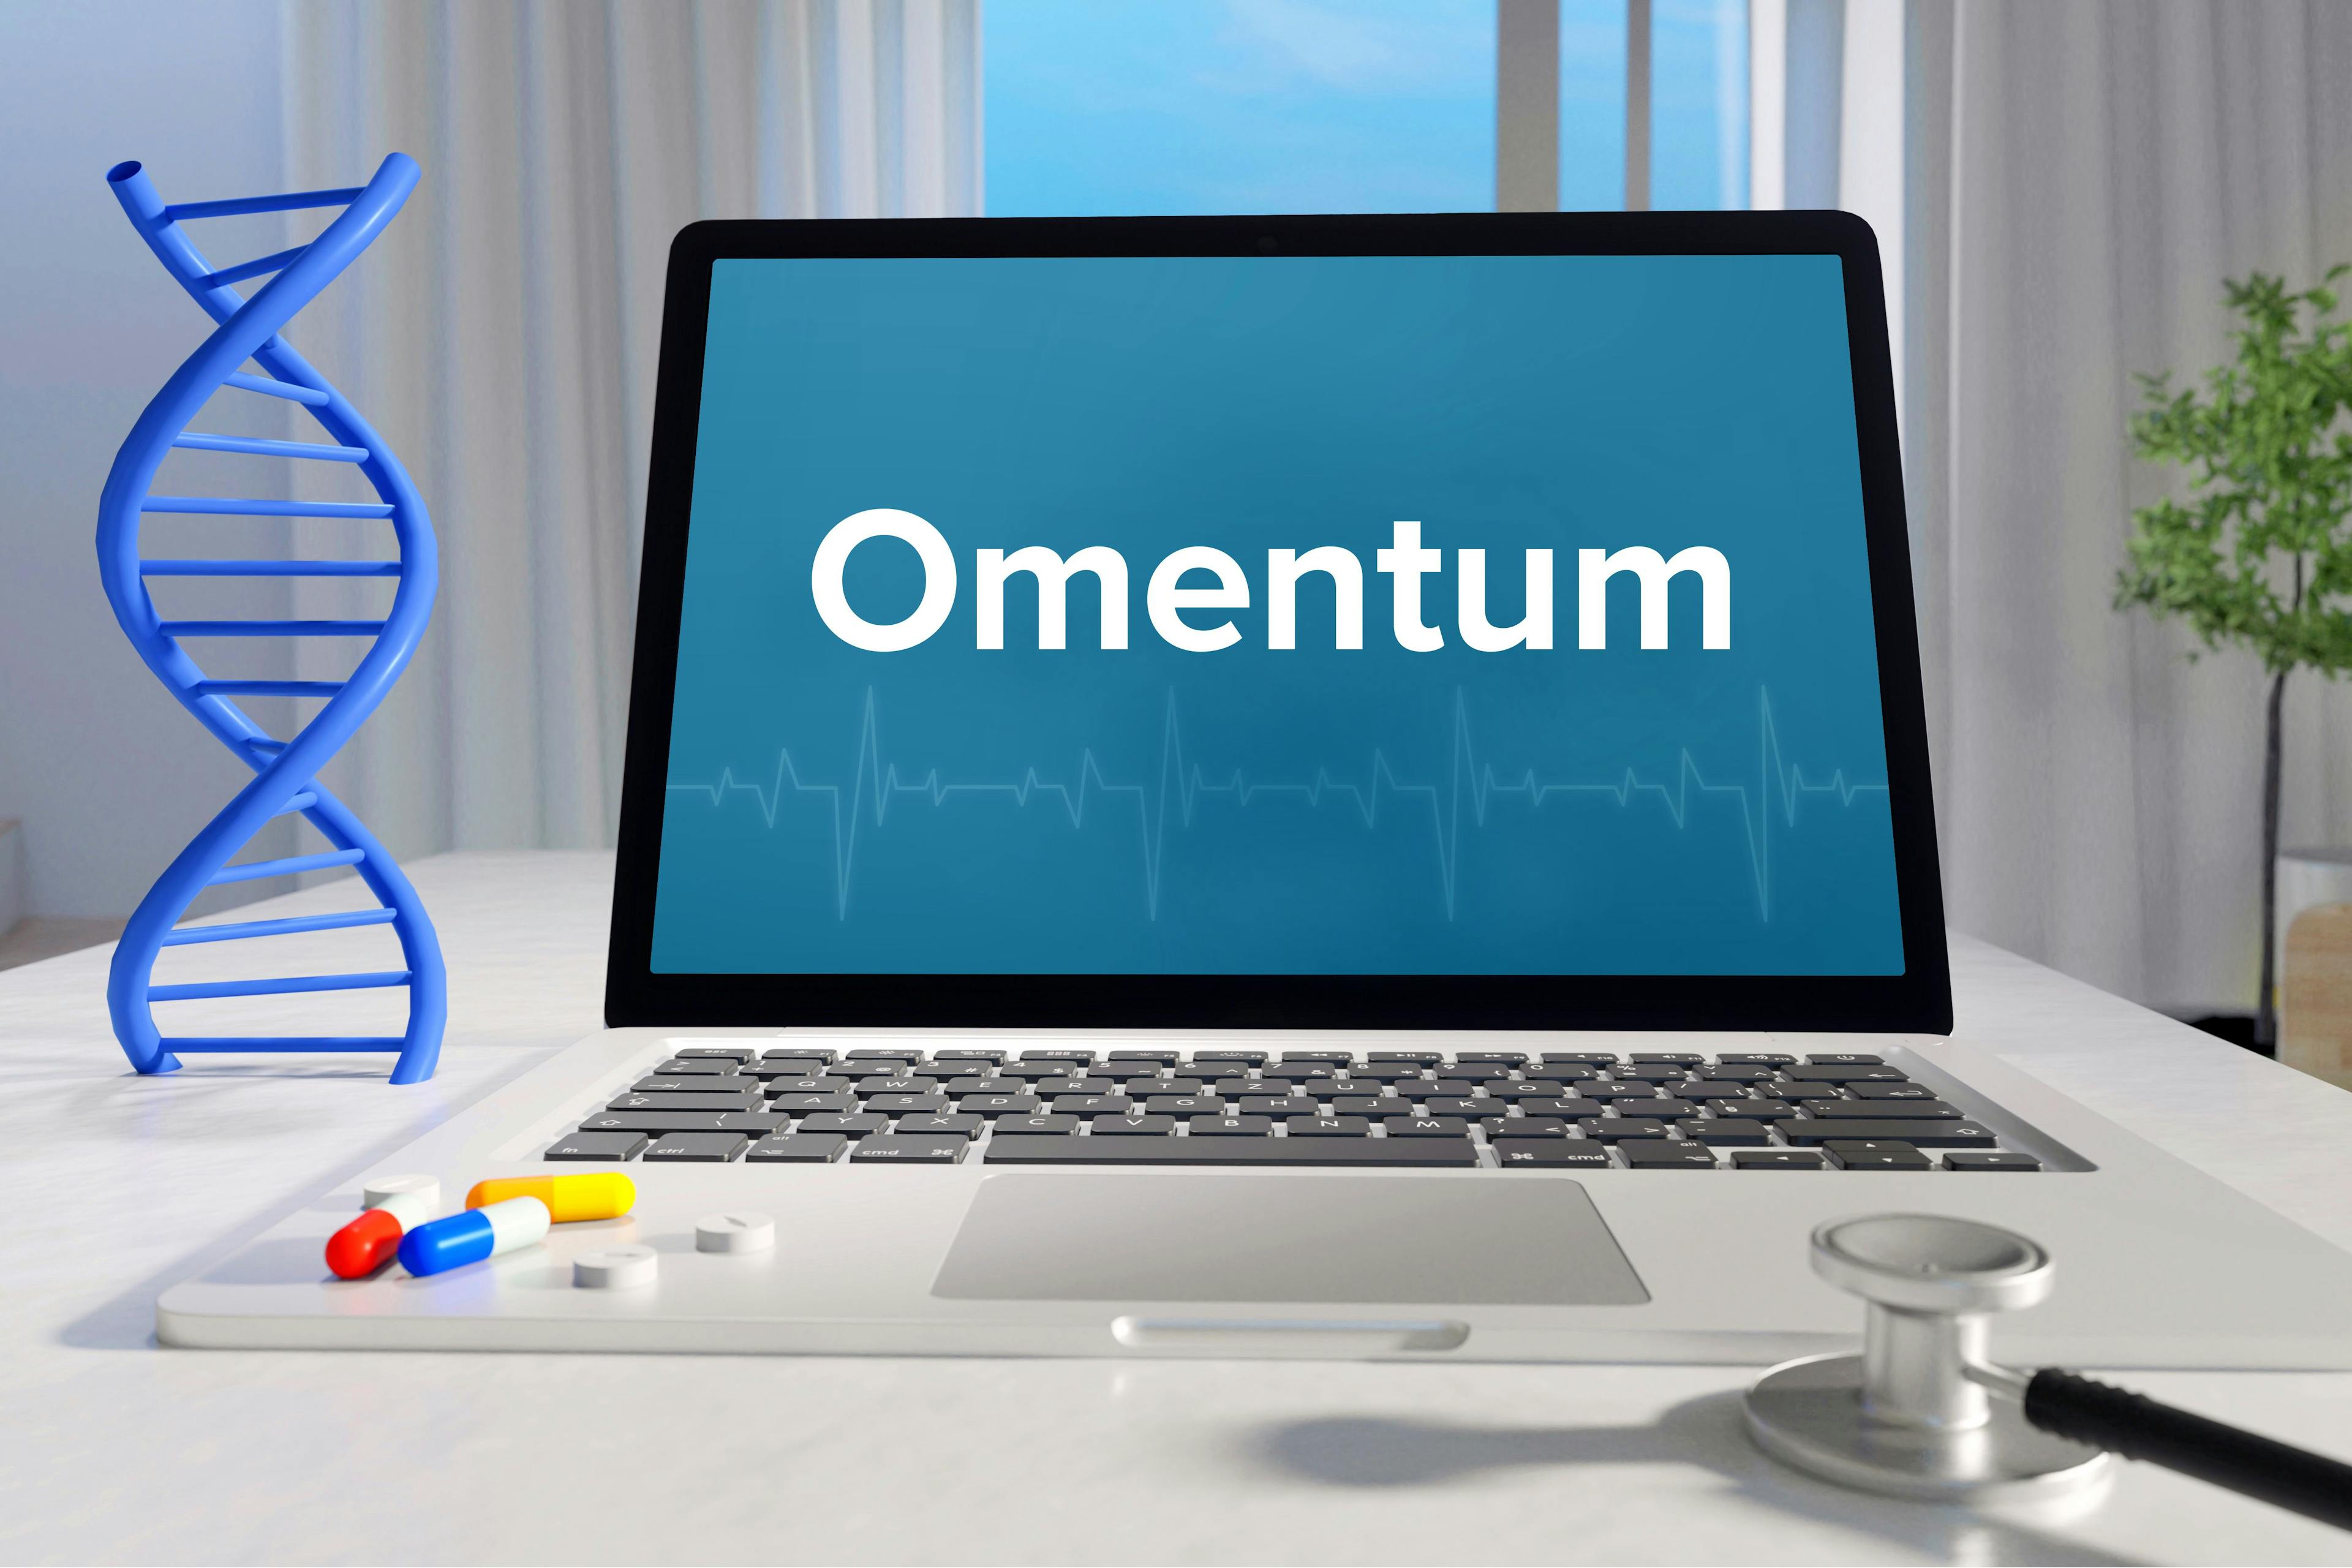 Omentum– Medicine/health. Computer in the office with term on the screen. Science/healthcare | Image credit: © MQ-Illustrations - © stock.adobe.com